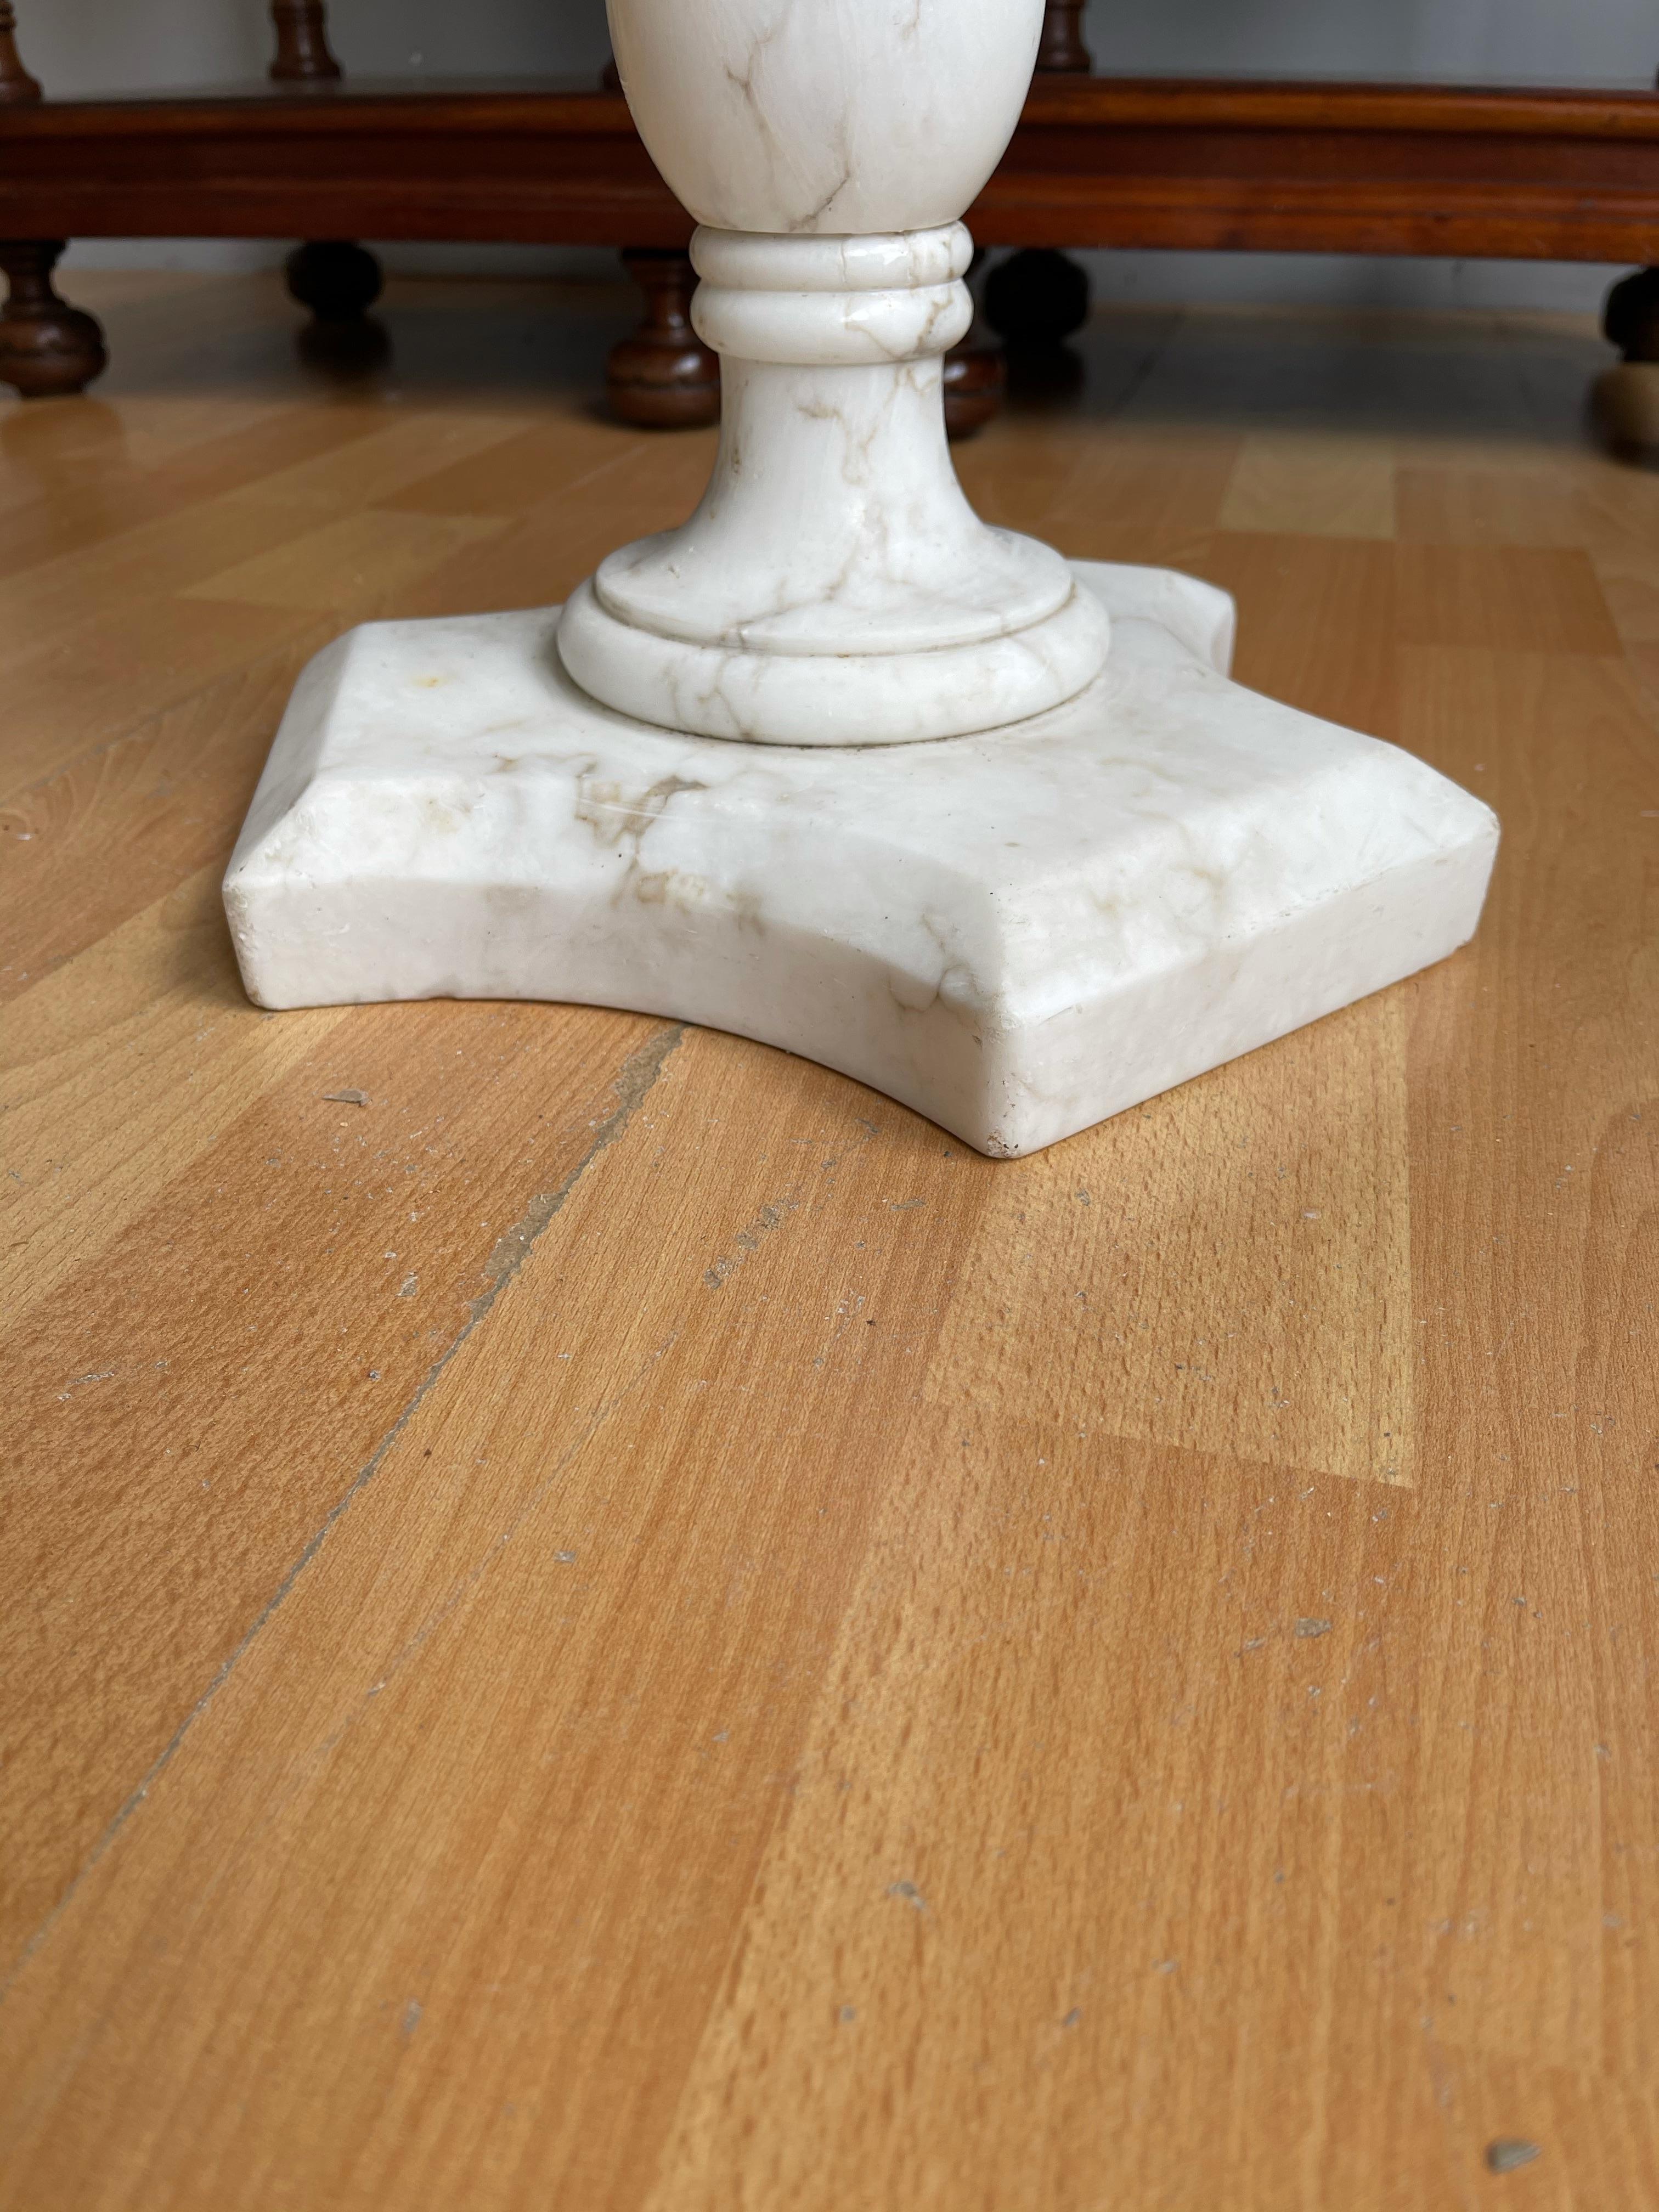 Italian Design Midcentury Modern White Carrara Marble Pedestal Stand / End Table For Sale 2